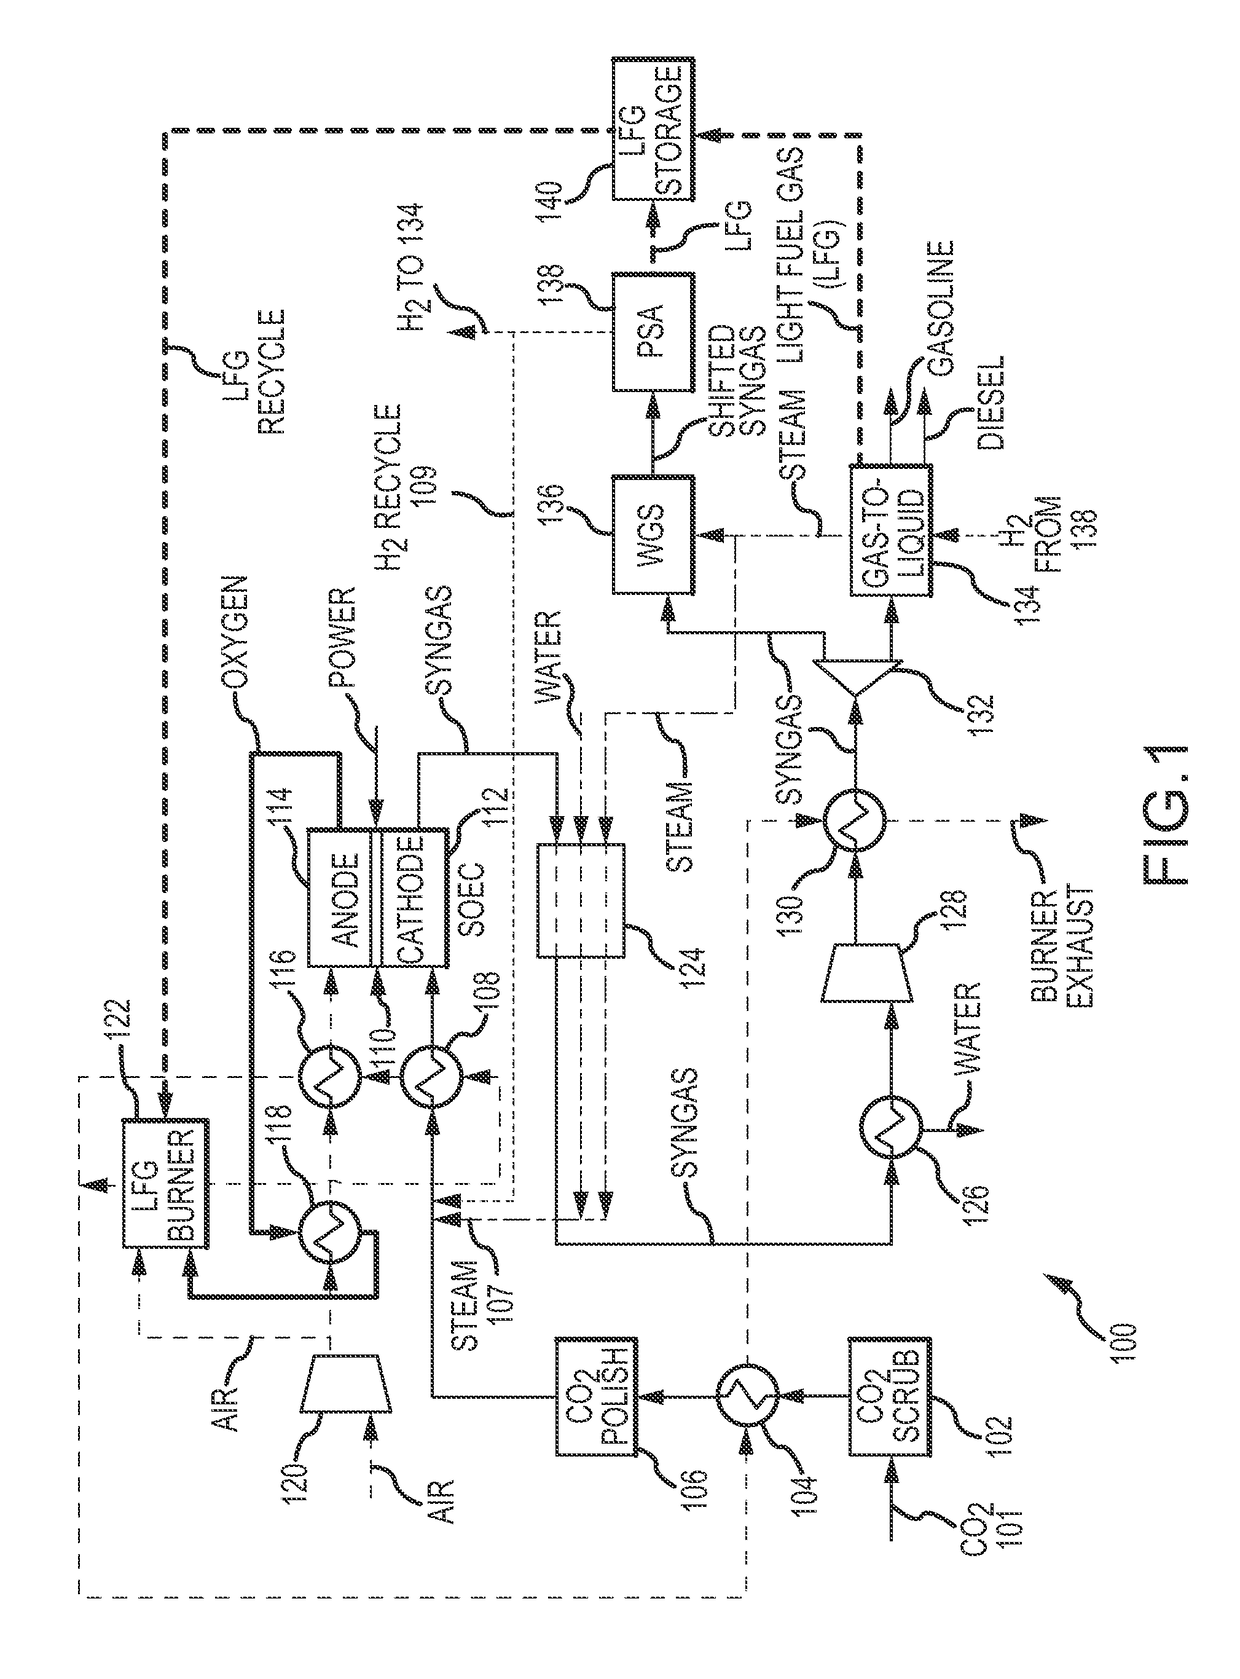 Electrochemical device for syngas and liquid fuels production